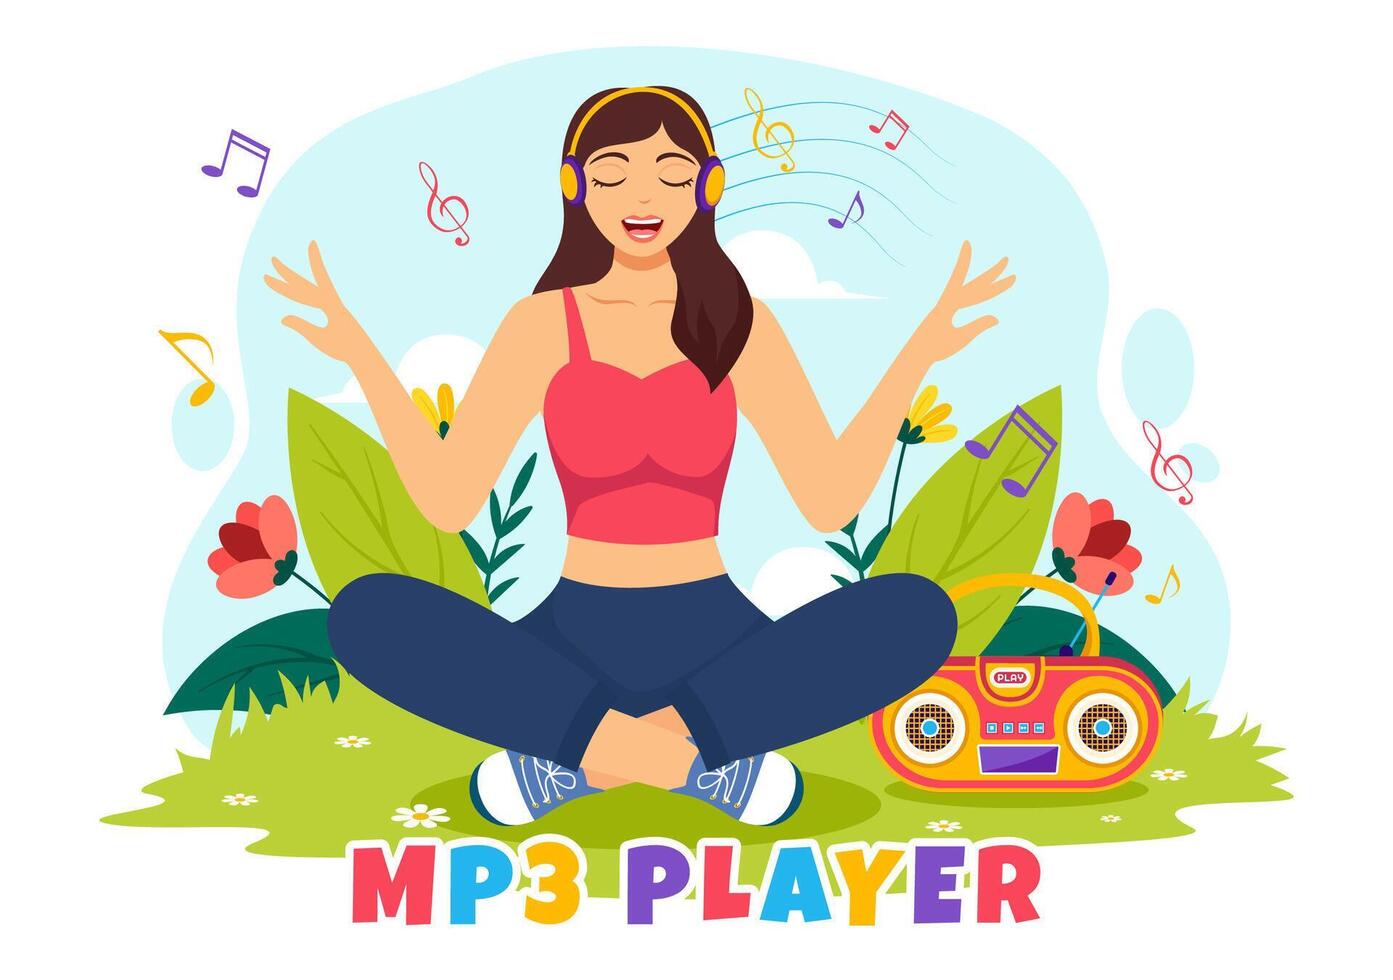 MP3 Player Vector Illustration with Musical Notation, Headphones, Headset and Phone of Music Listening Devices in Mobile App on Flat Background